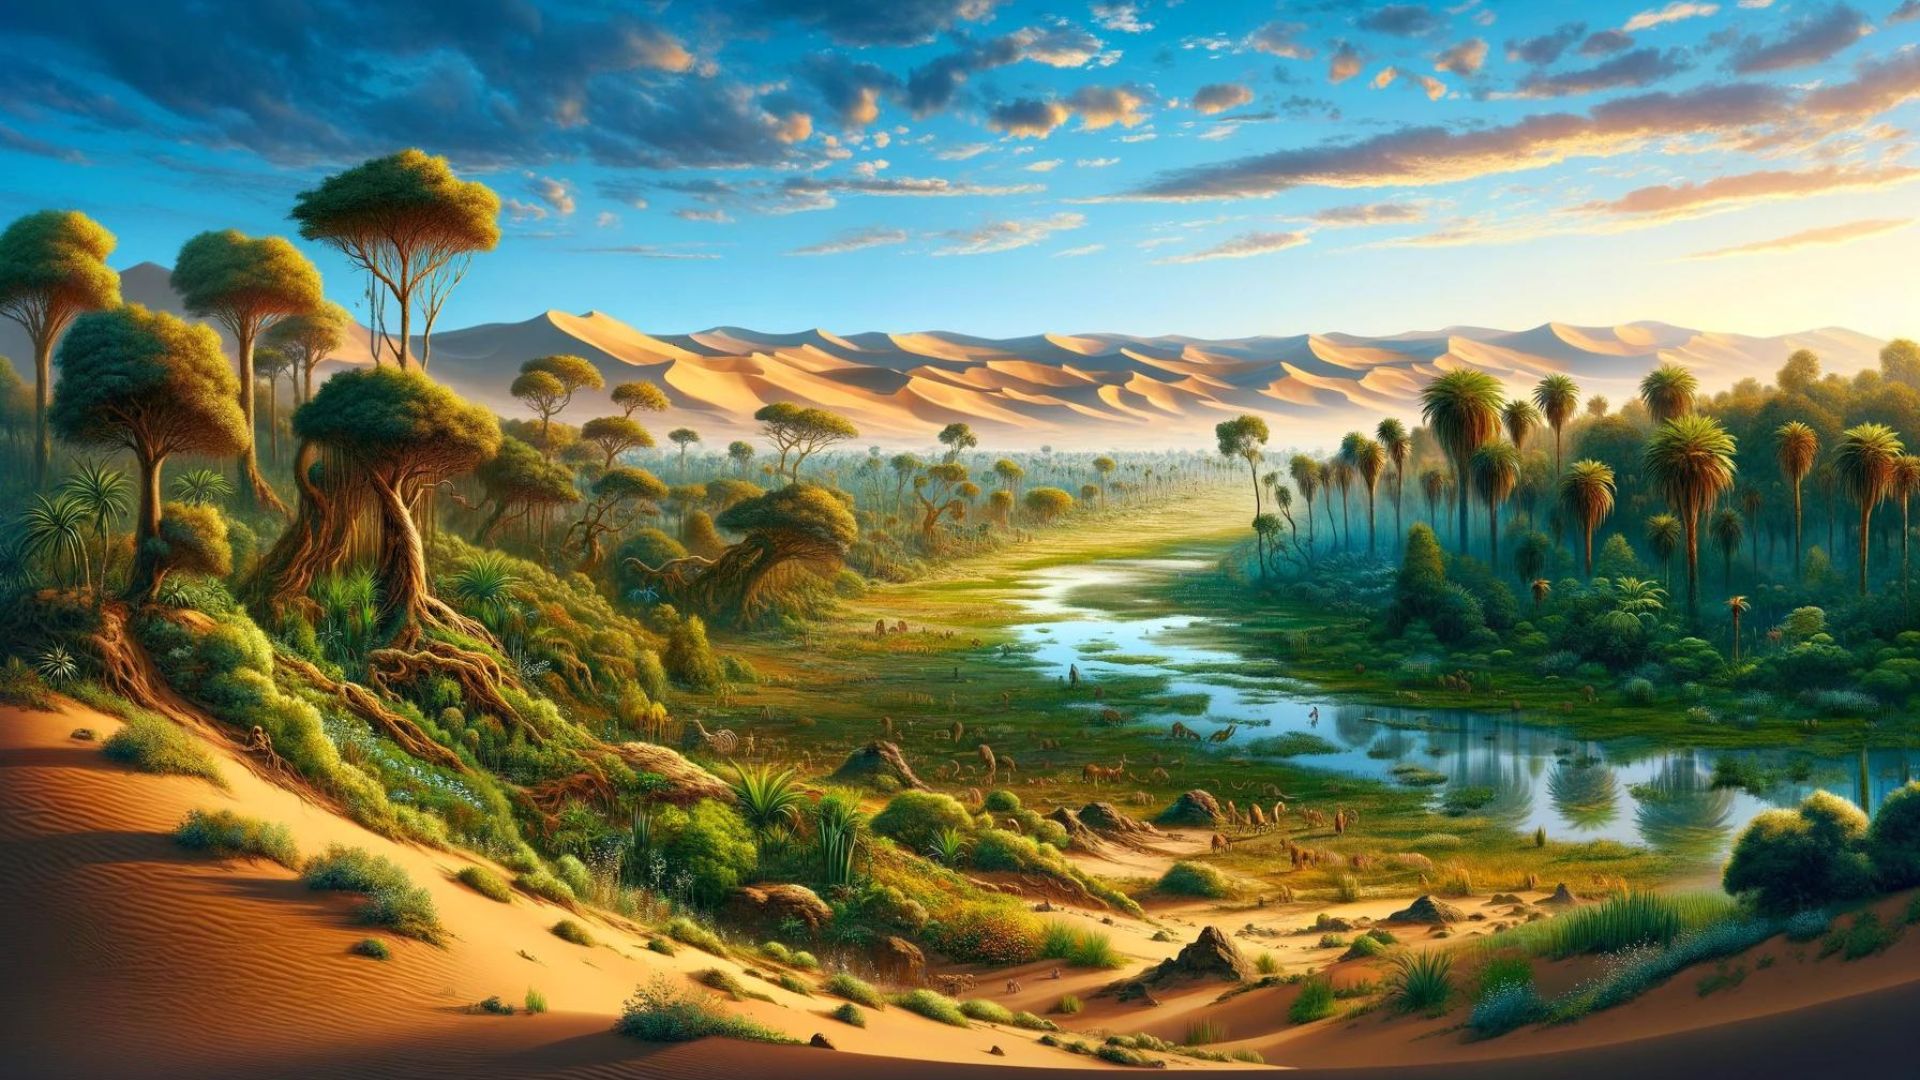 The Sahara Desert Used to be Lush and Green